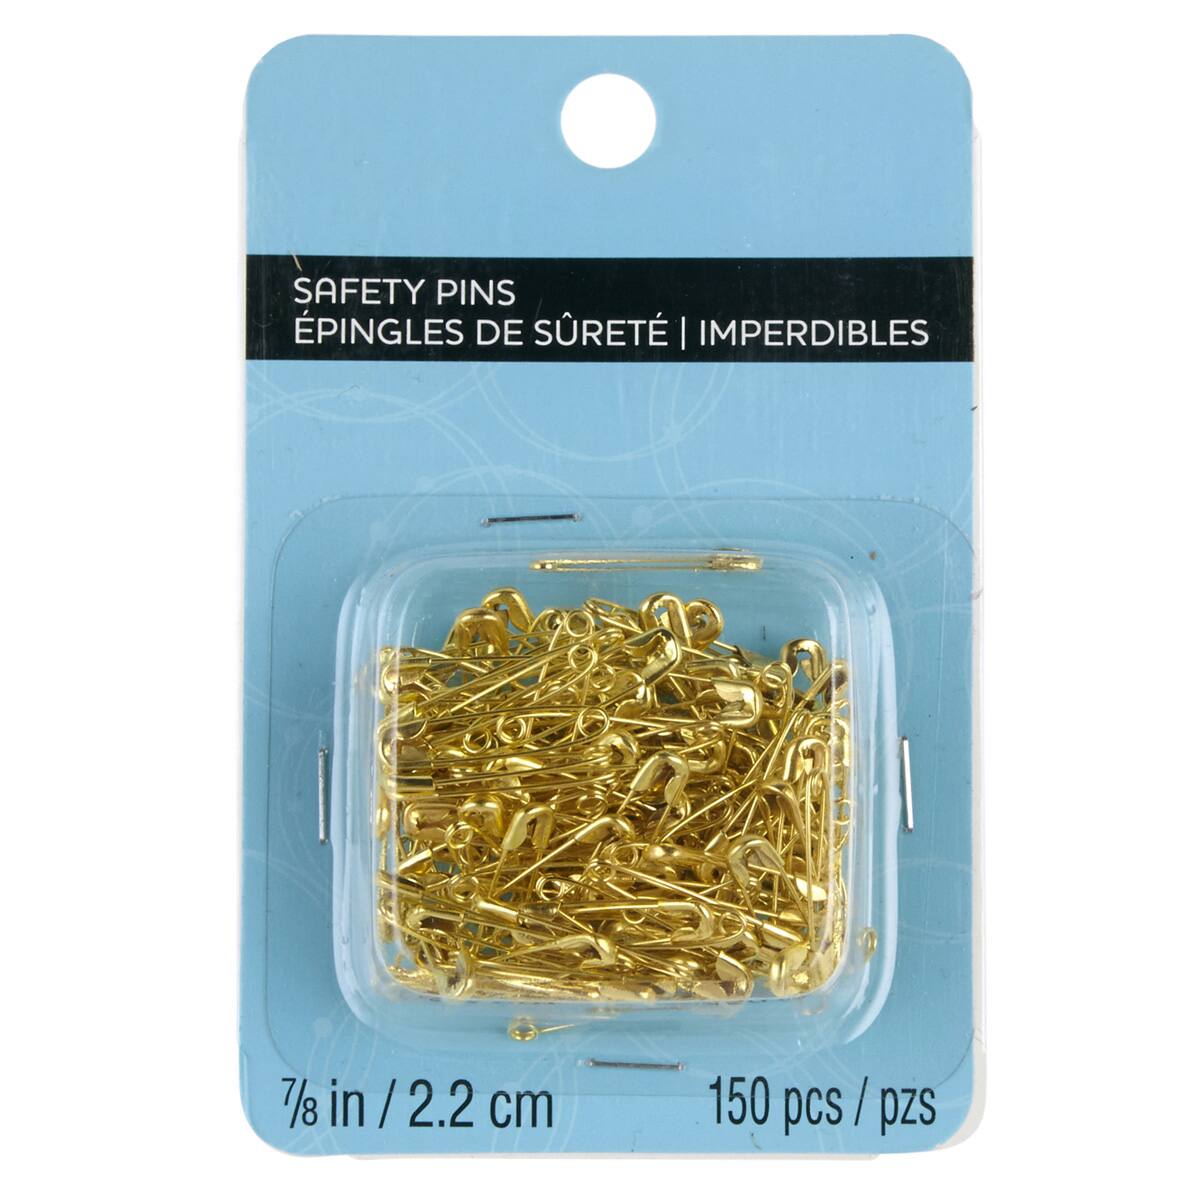 2000 pcs silver black gold mini nickel plated safety pins 4/5'' length 18mm